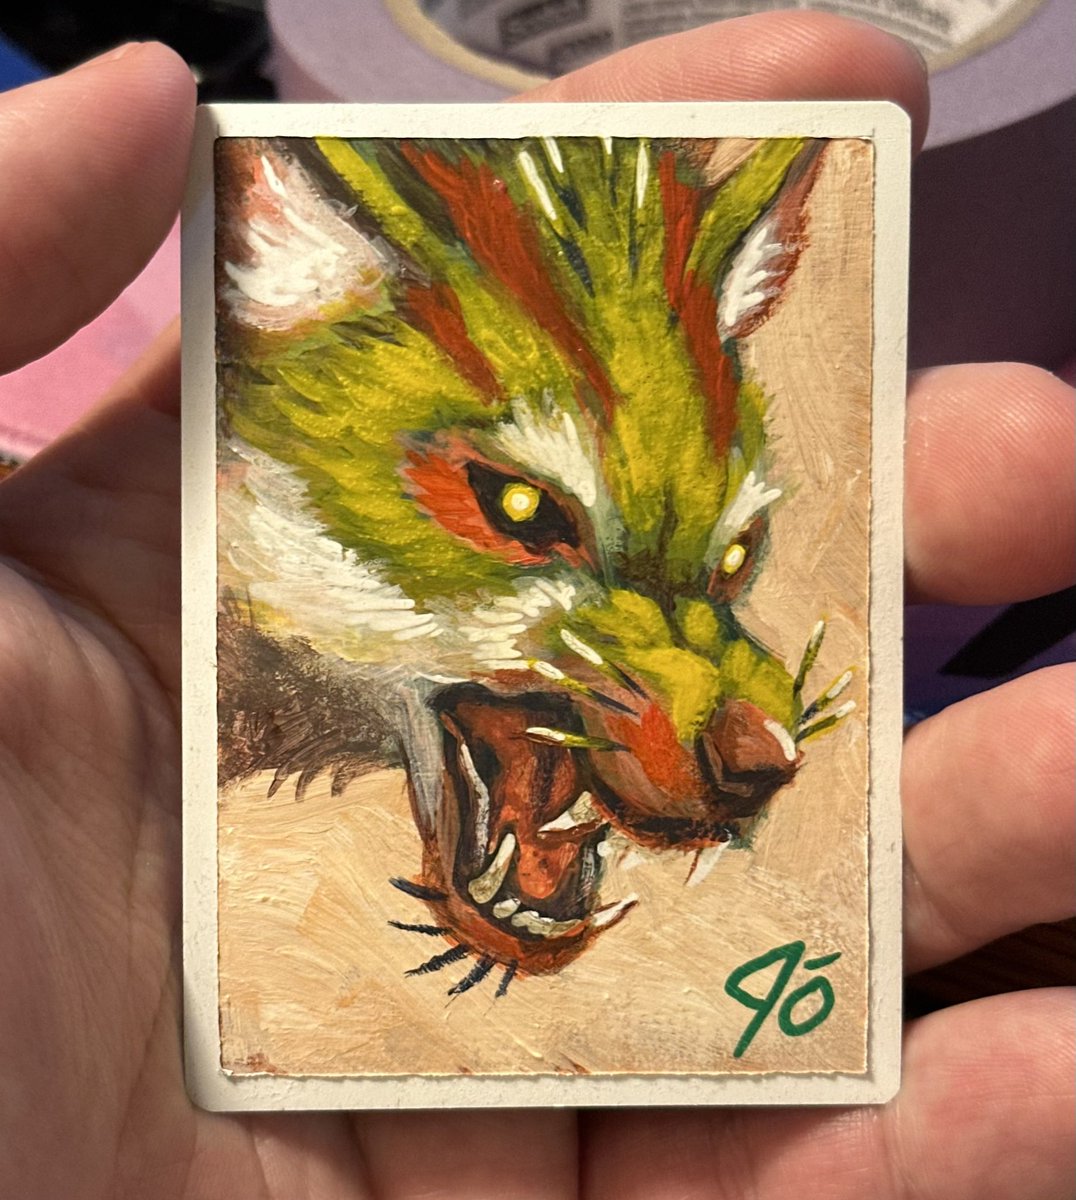 Bristlepack Sentry AP with its namesake painted on it. Commissions starting soon, @DonnyCaltrider is the man to talk to once they open up. #magicthegathering #artistproof #wolf #cactus